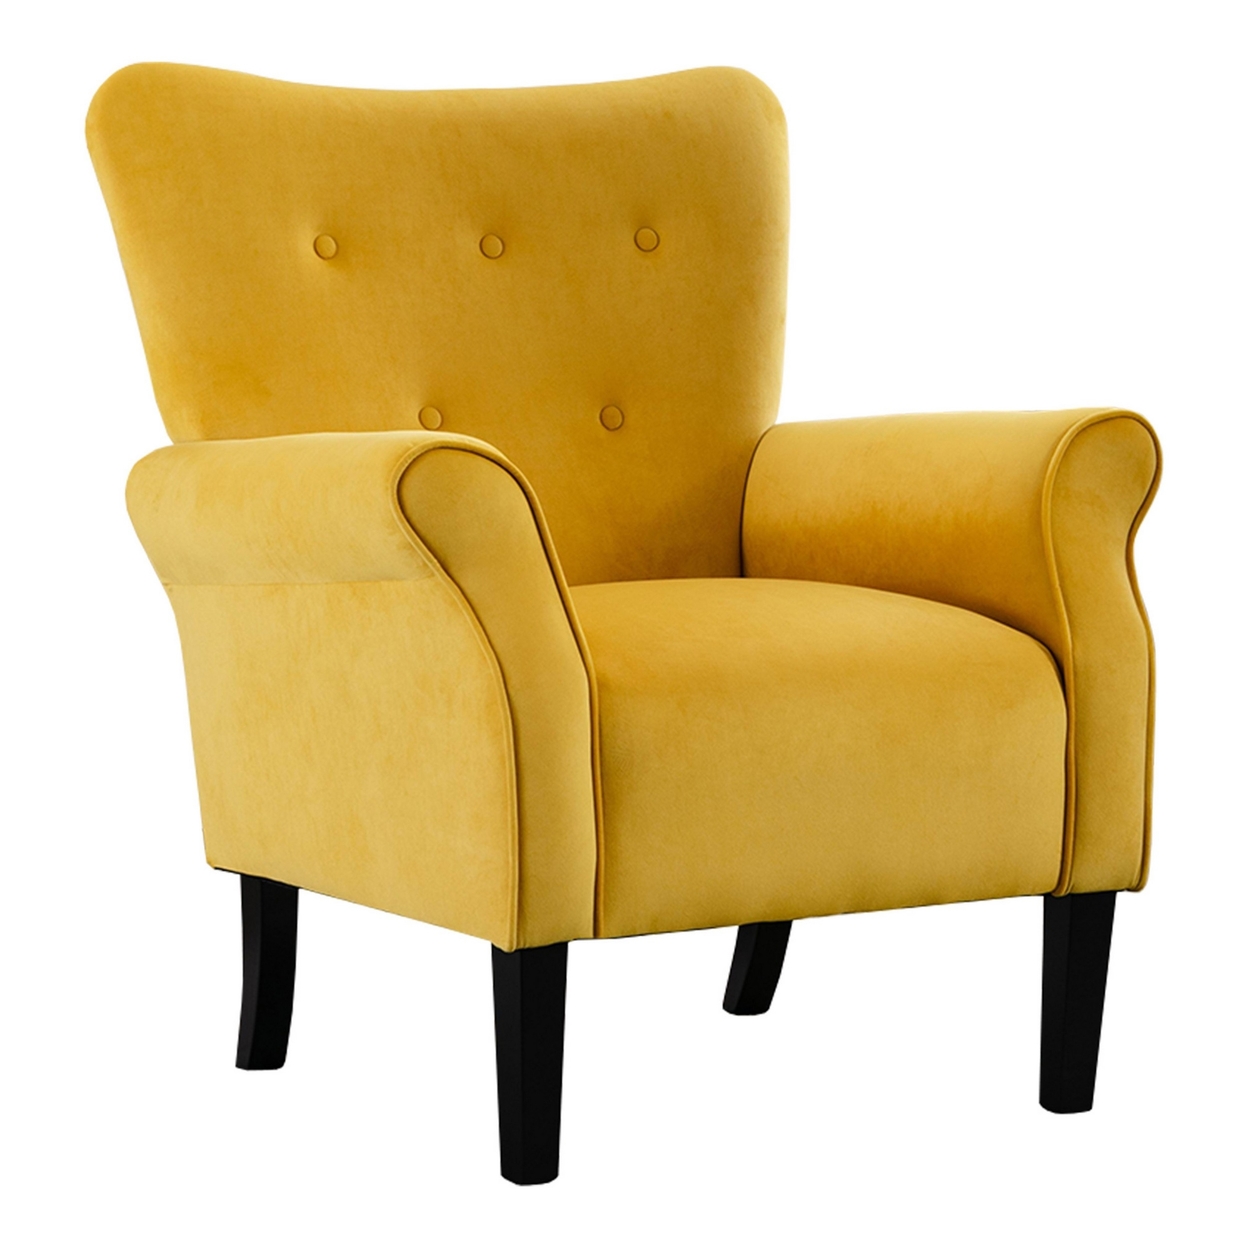 Cilic 32 Inch Accent Chair, Button Tufted Back, Rolled Arms, Yellow Fabric- Saltoro Sherpi